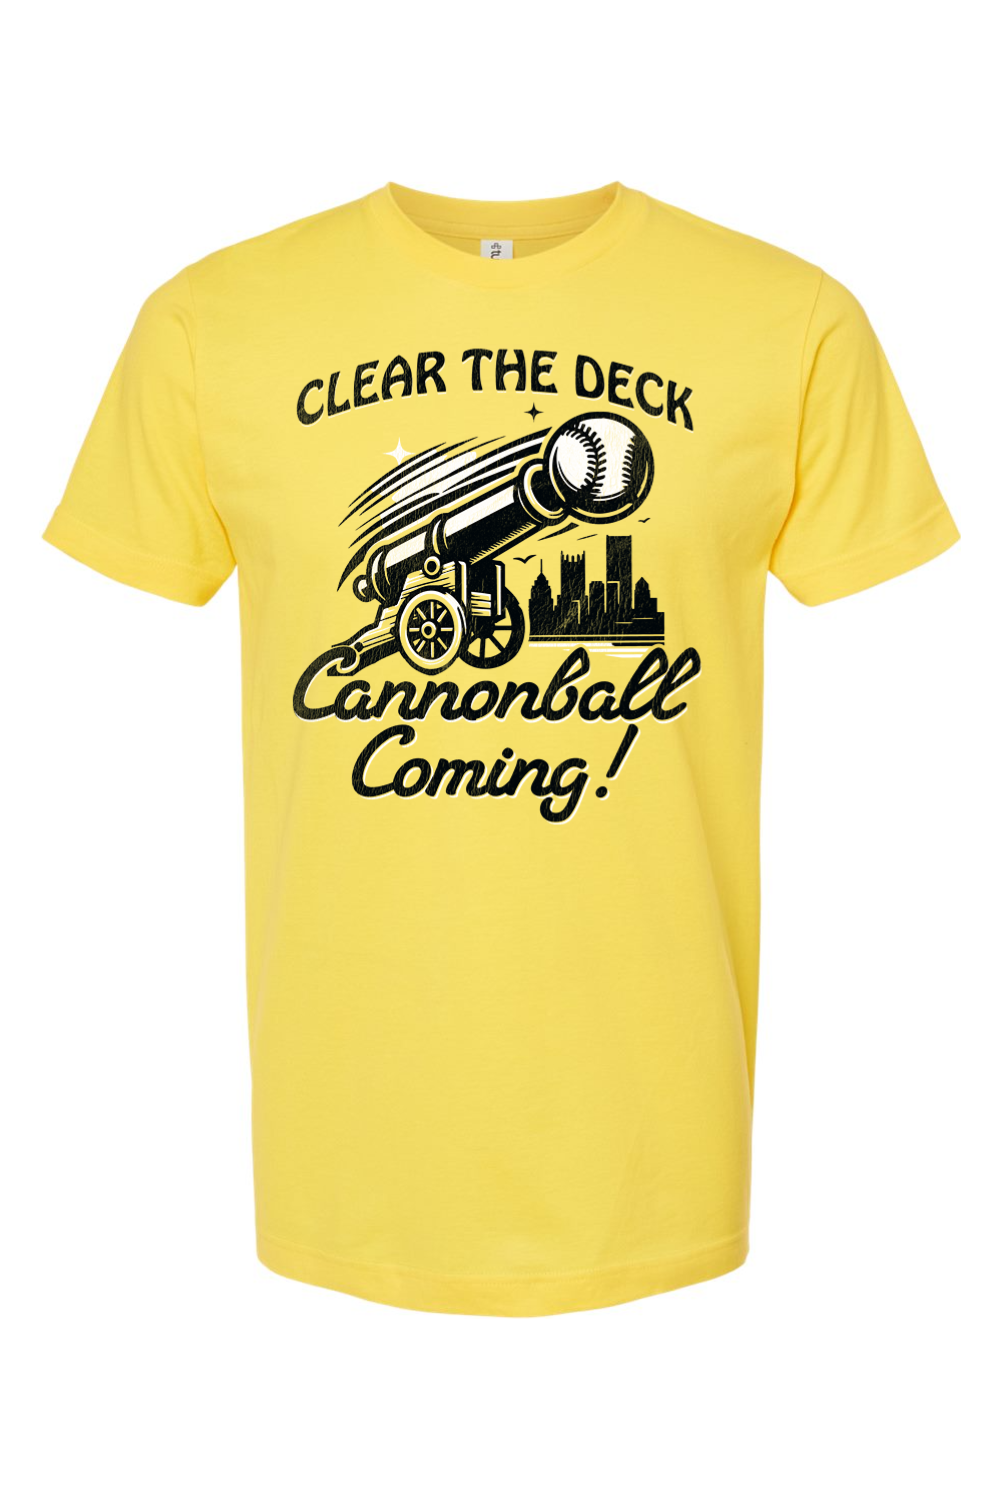 Clear the Deck - Cannonball Coming!